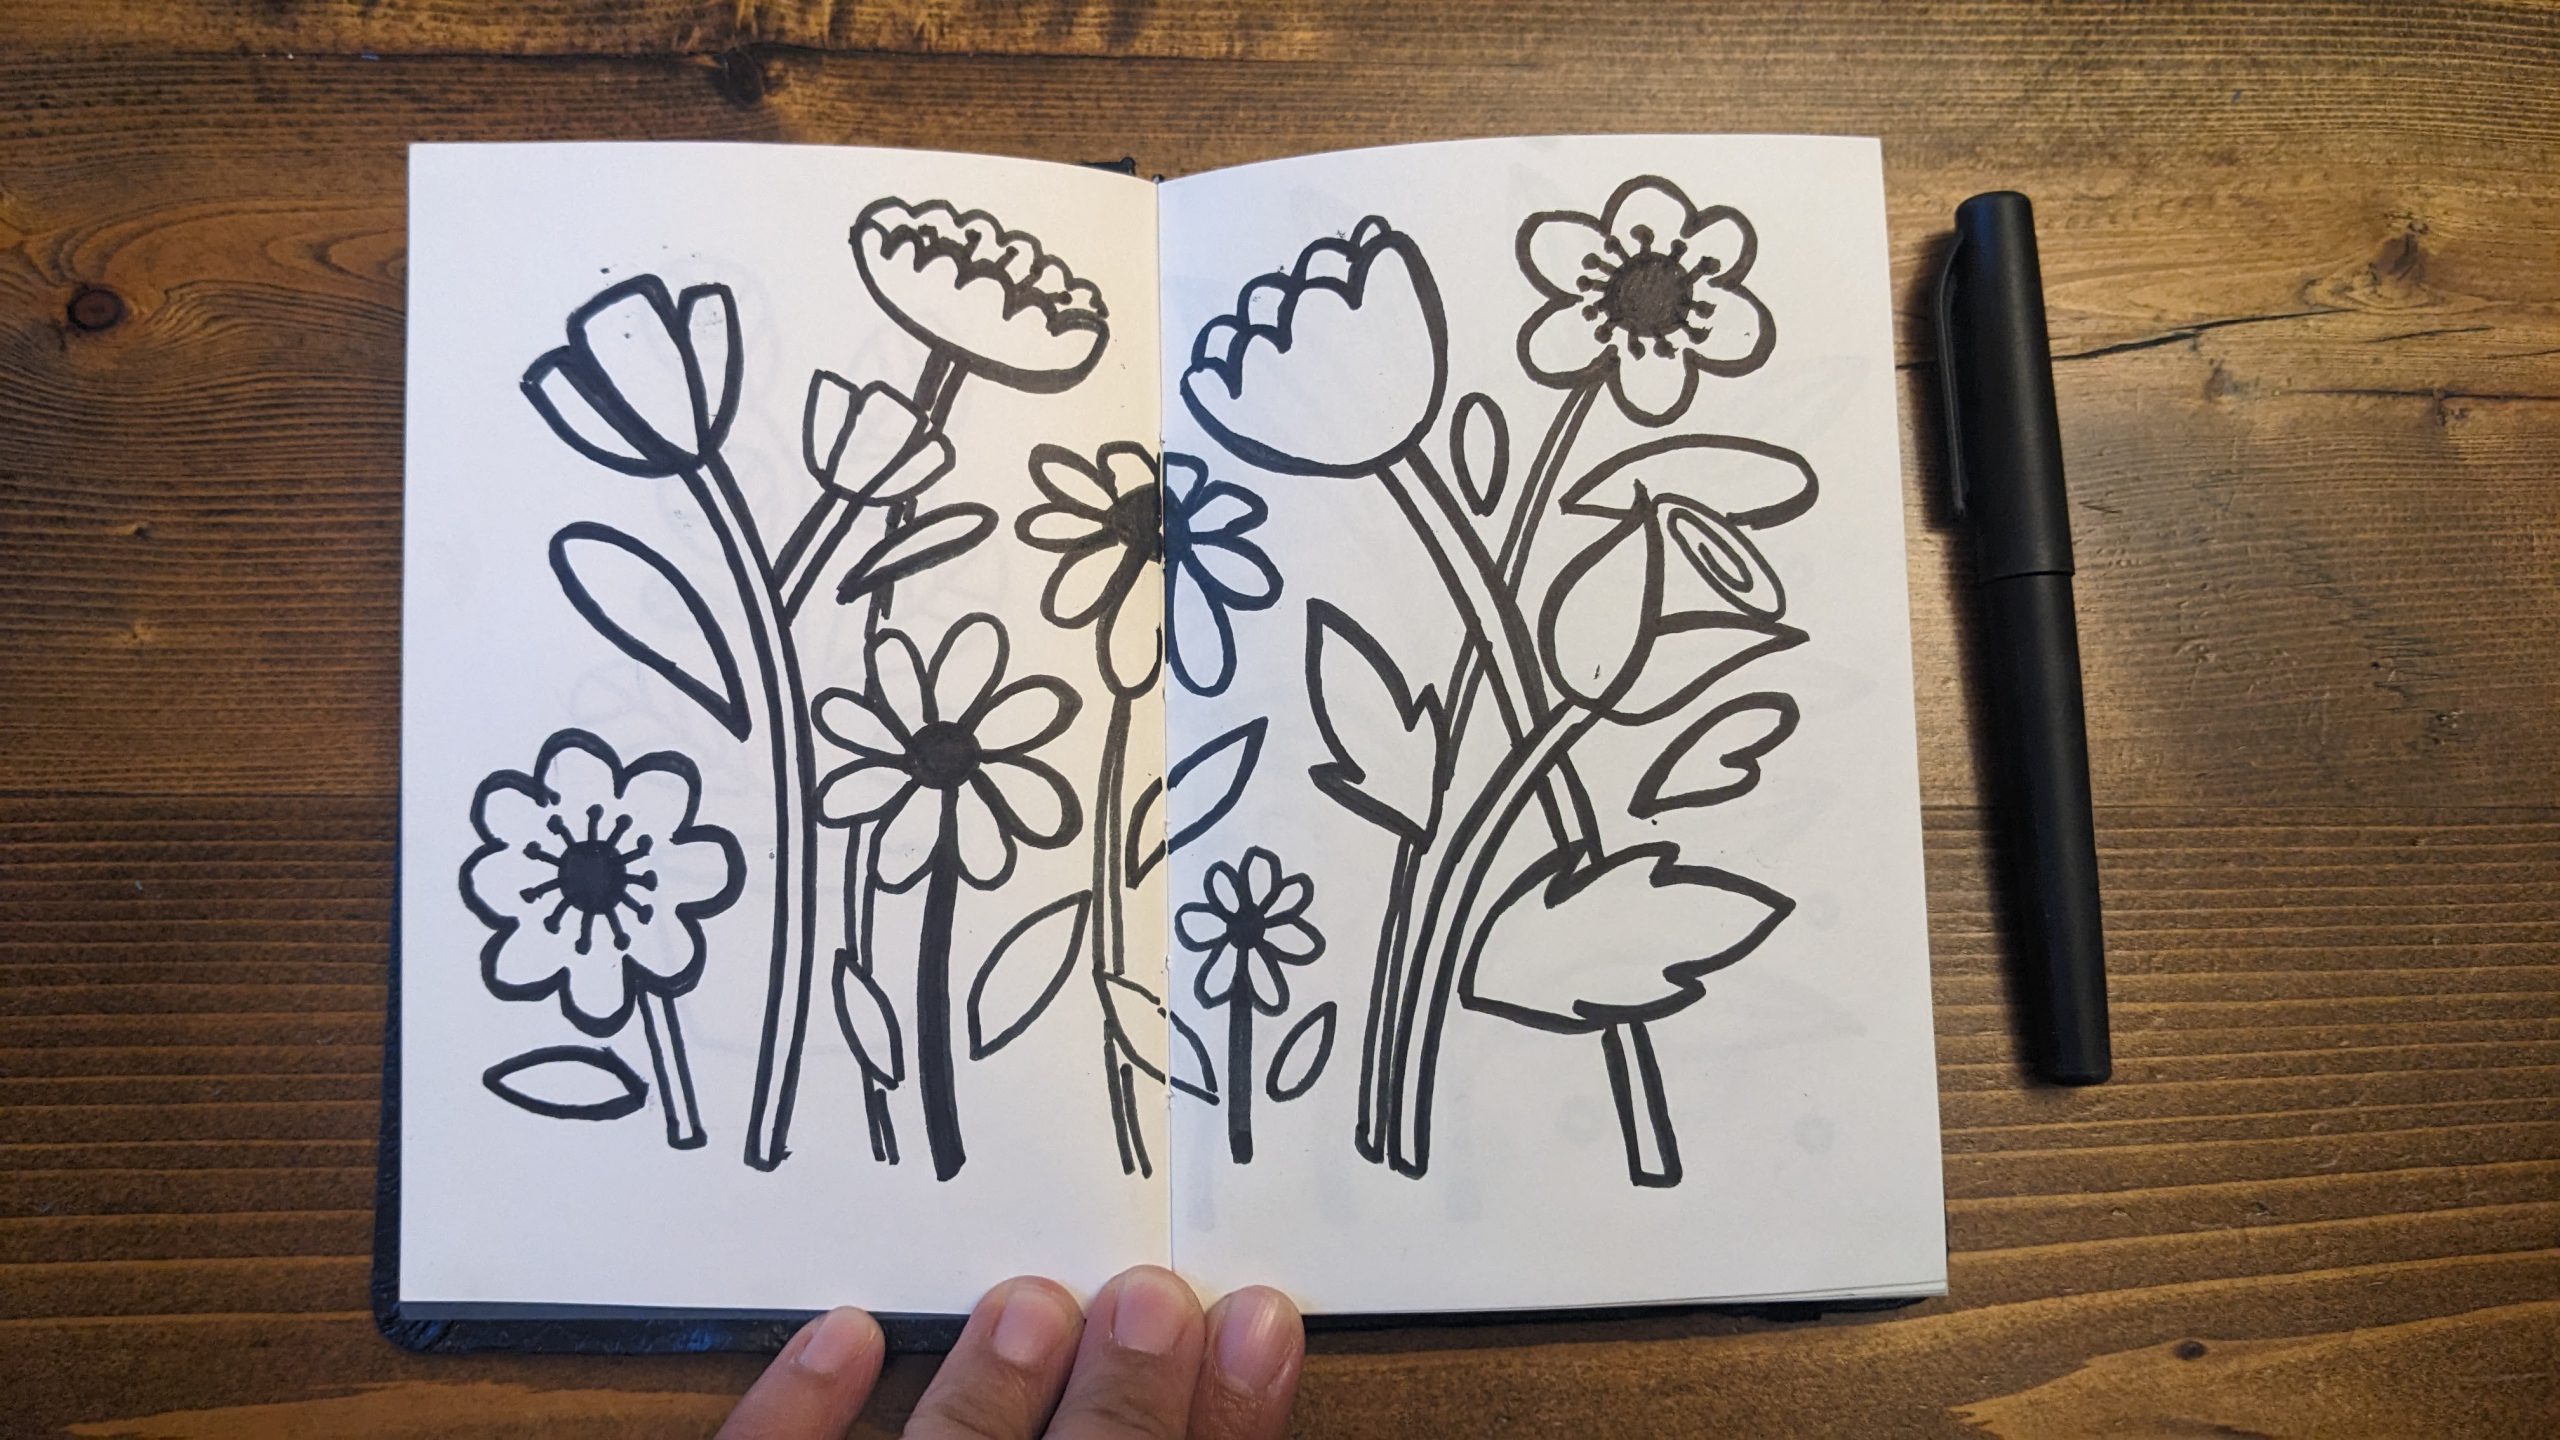 Flowers of different types across the page